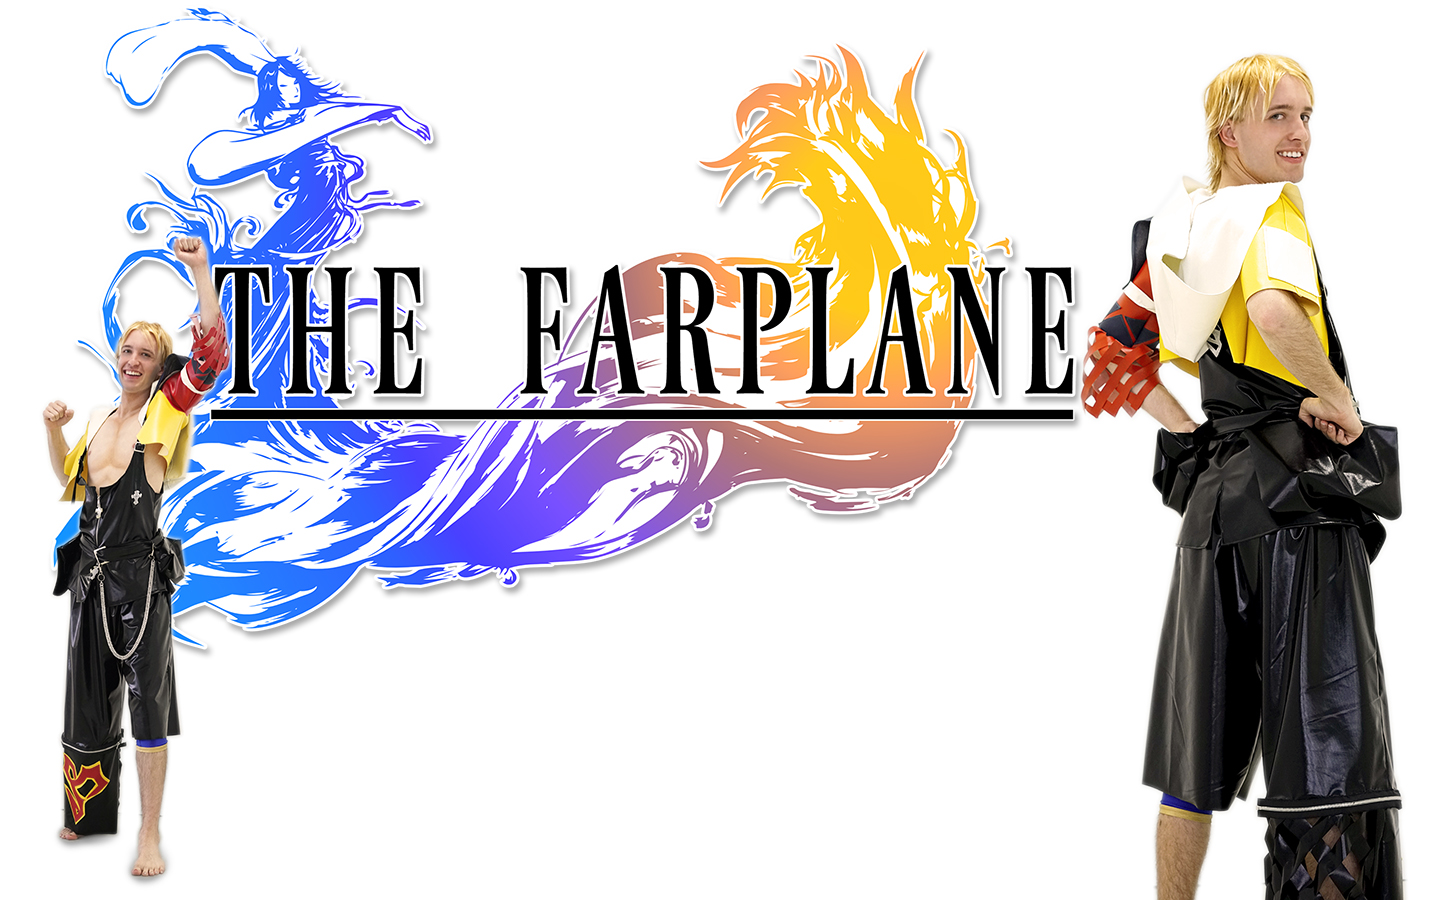 Jesse dressed as Tidus from Final Fantasy 10 posing happily with text that reads 'The Farplane'